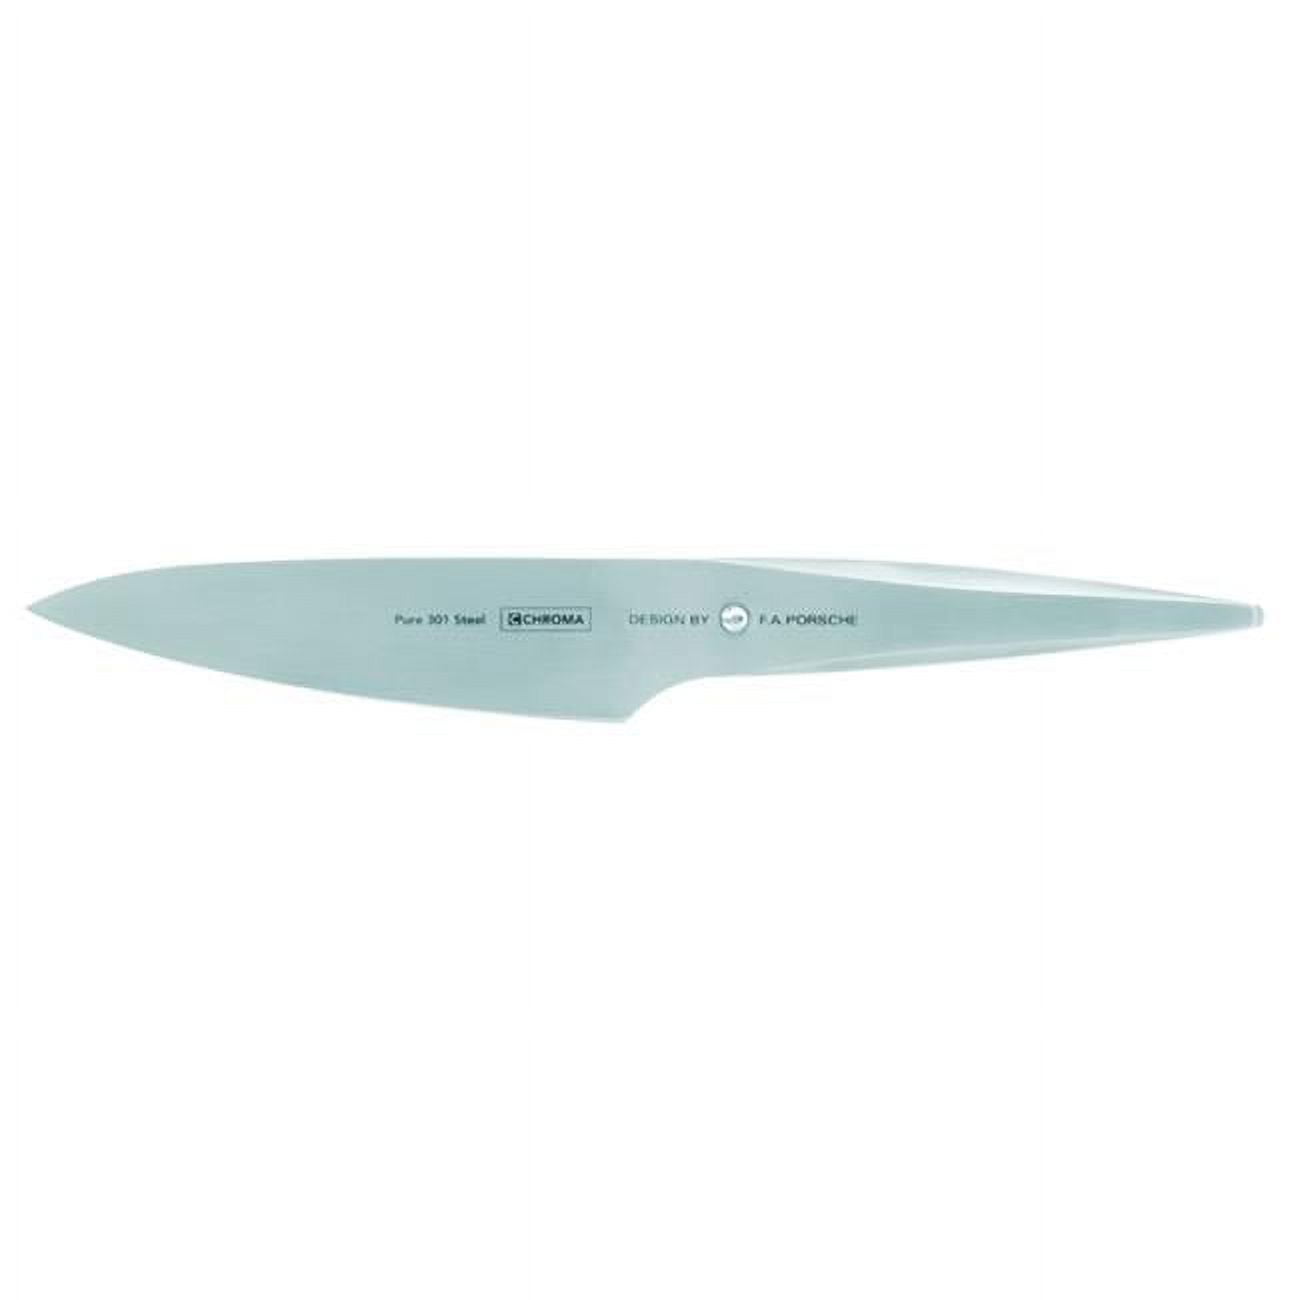 Chroma P04 Type 301 Designed By F.a. Porsche 5.75 In. Small Chef Knife